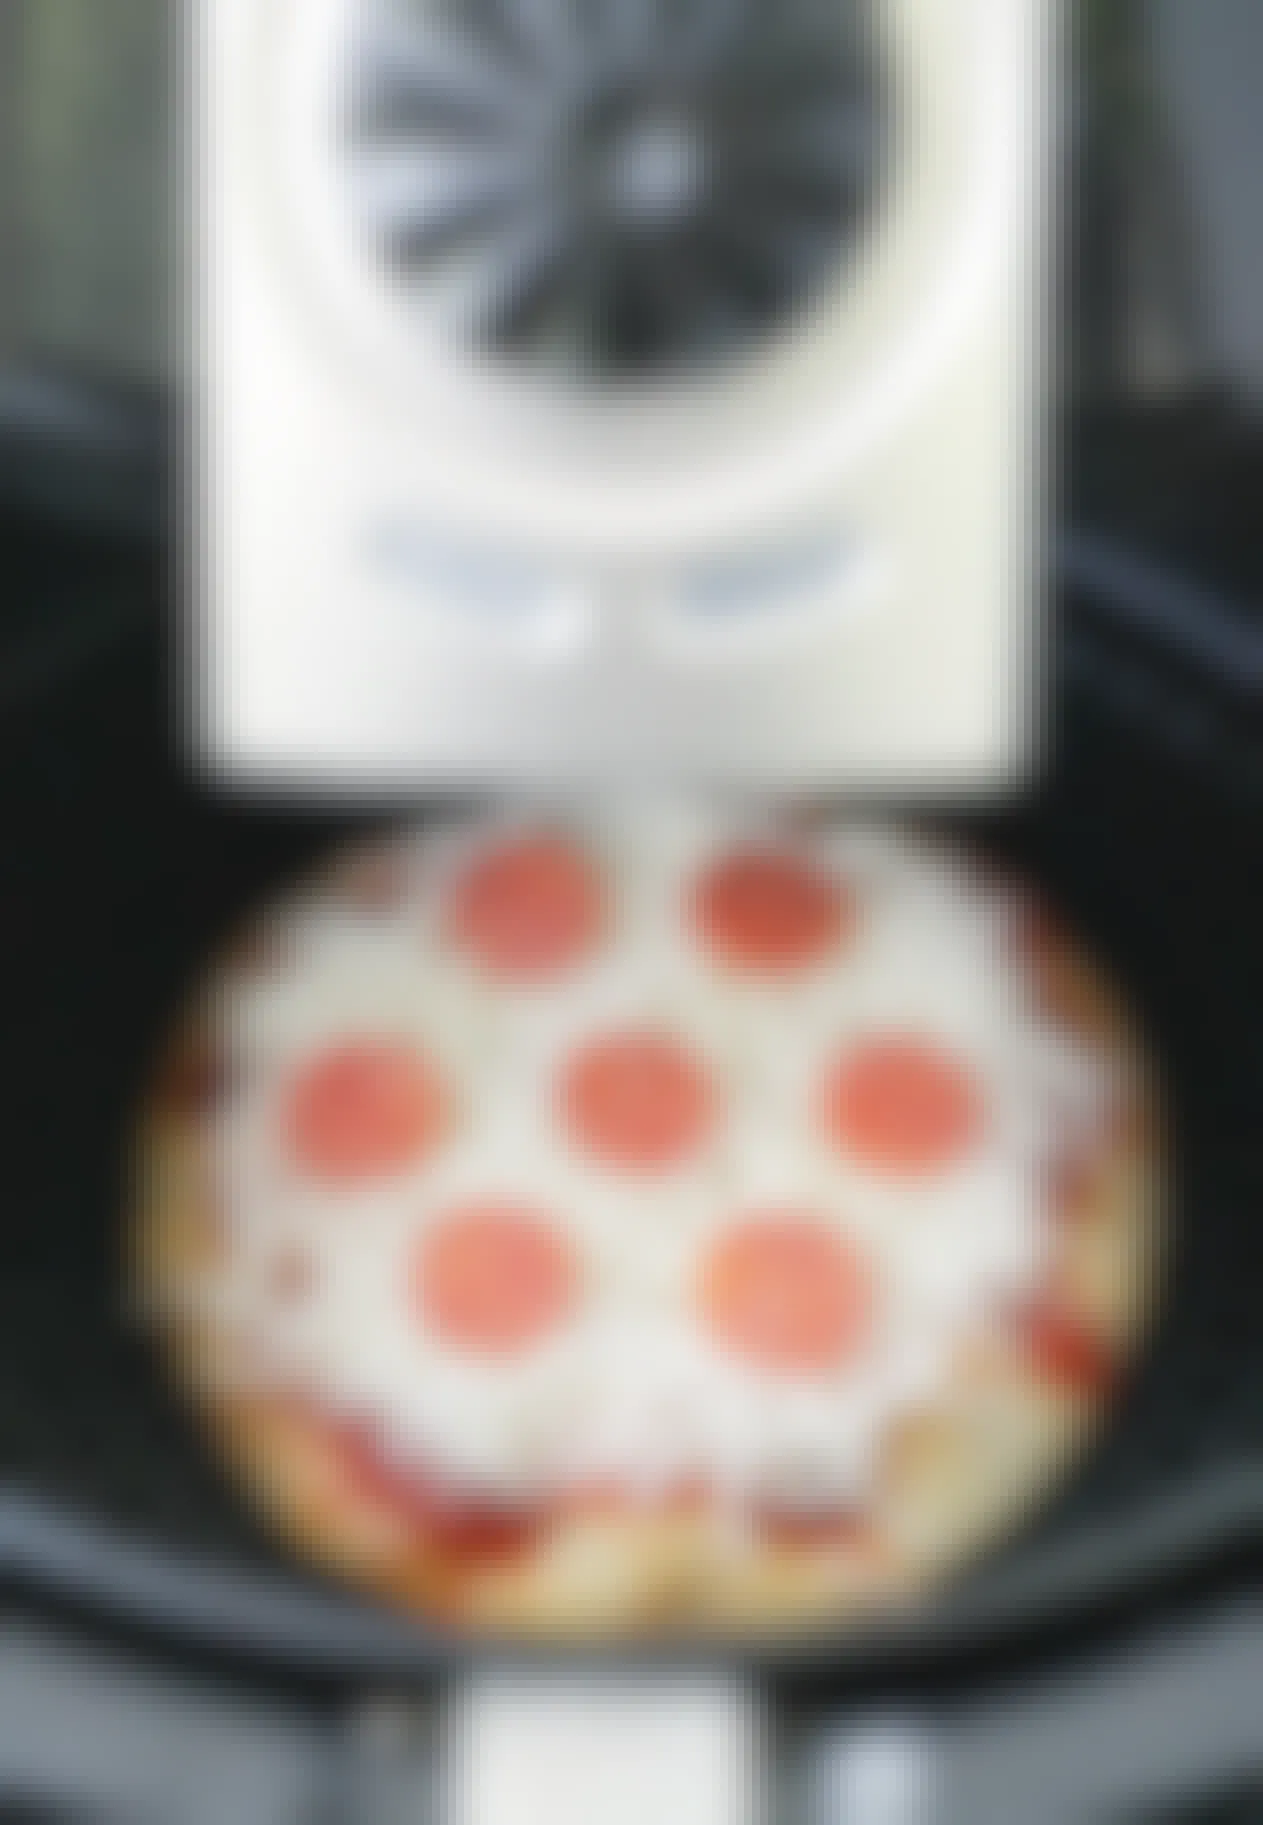 A personal pizza being cooked in an air fryer